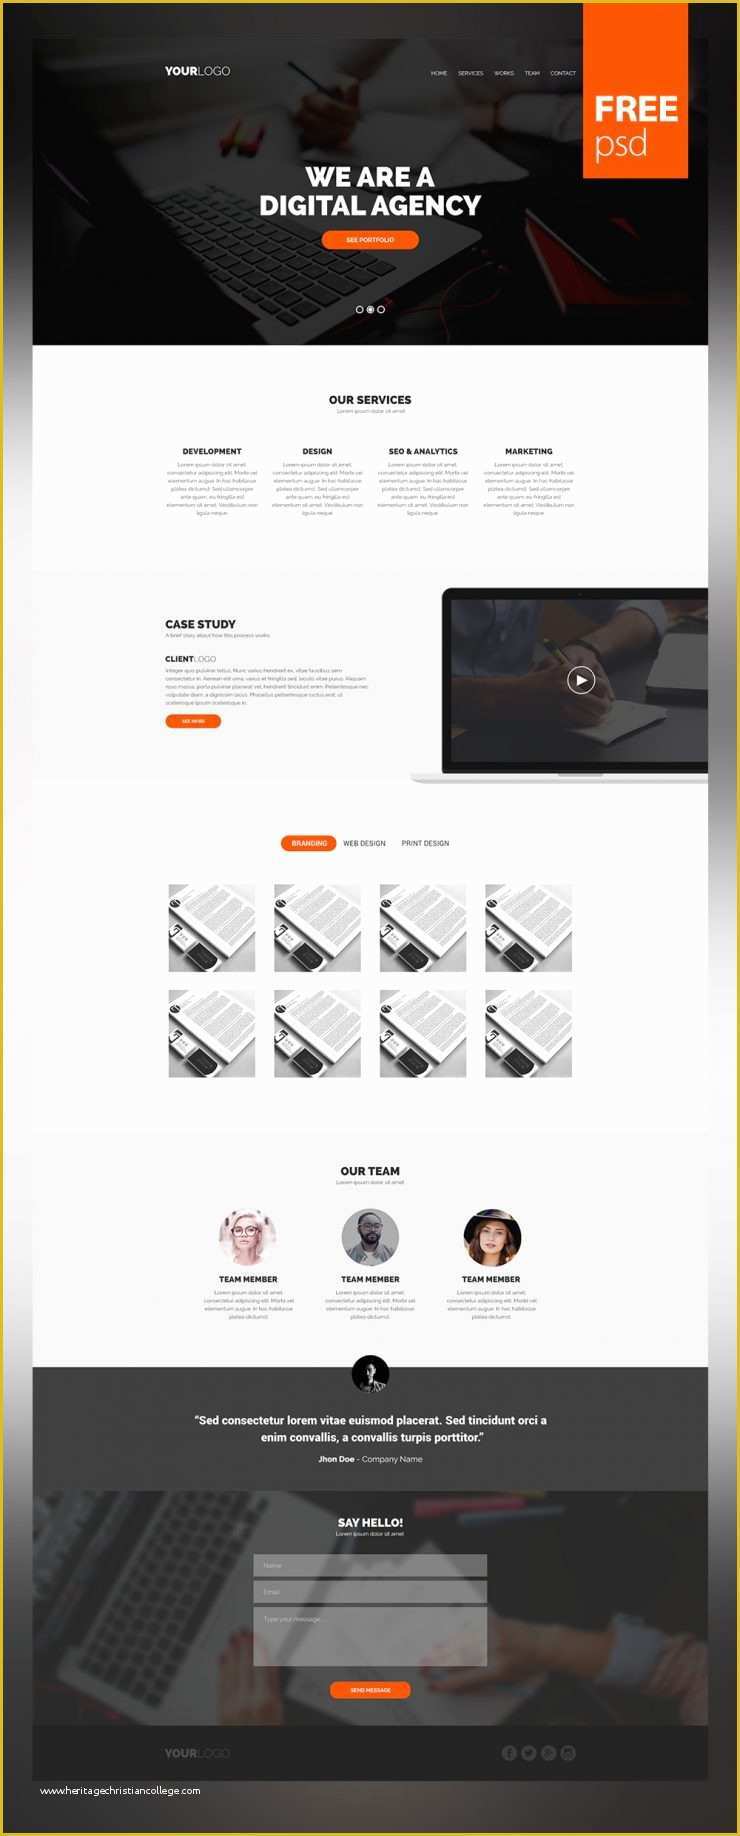 Free Simple Web Page Templates Of Simple and Clean Website Template Psd for Creative Digital